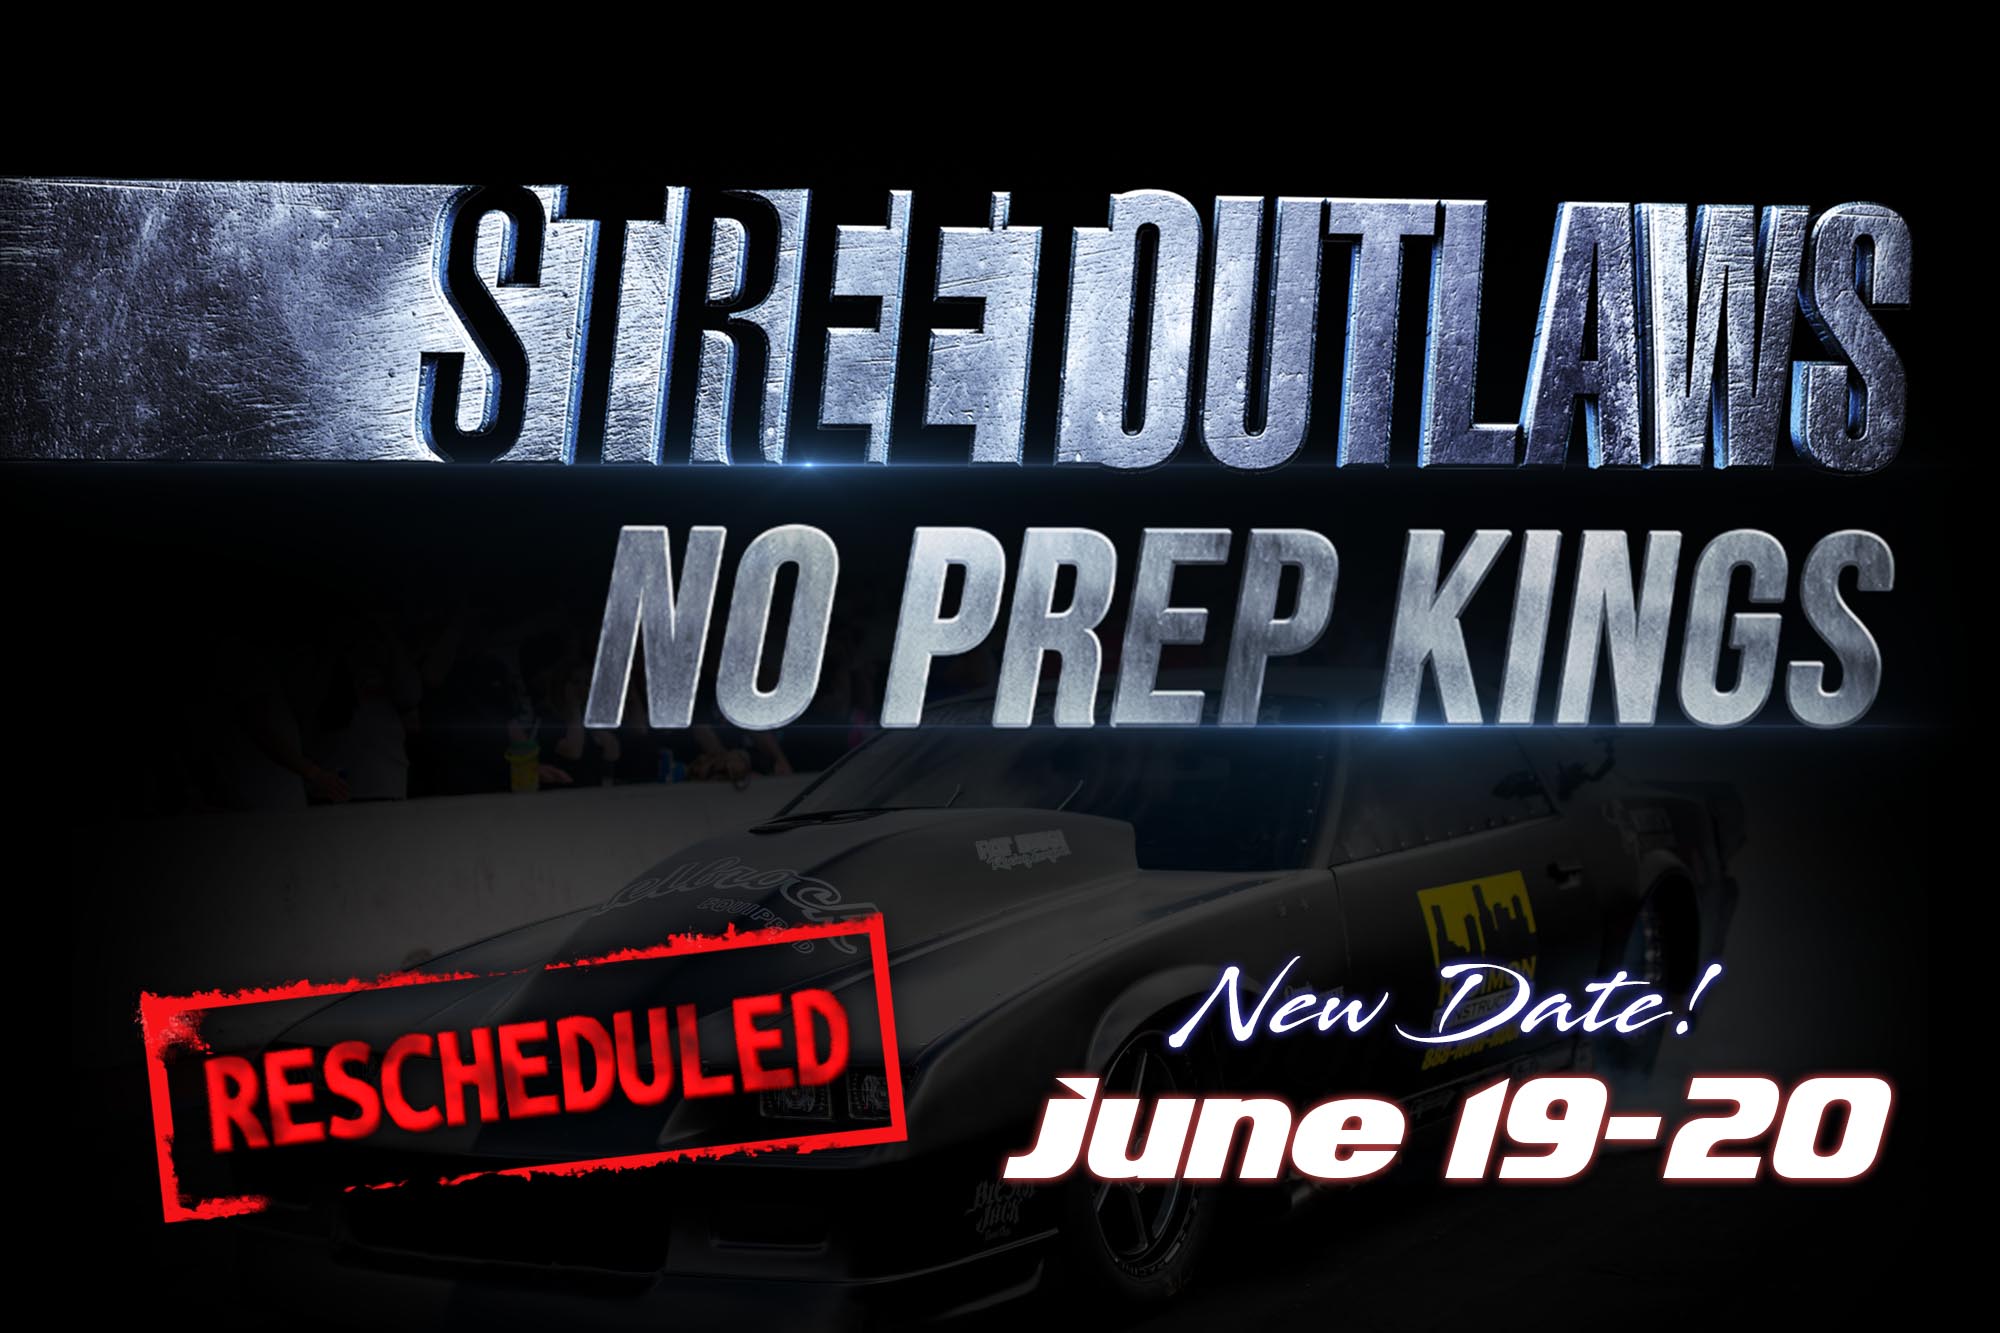 Street Outlaws No Prep Kings Rescheduled for June 1920 Virginia